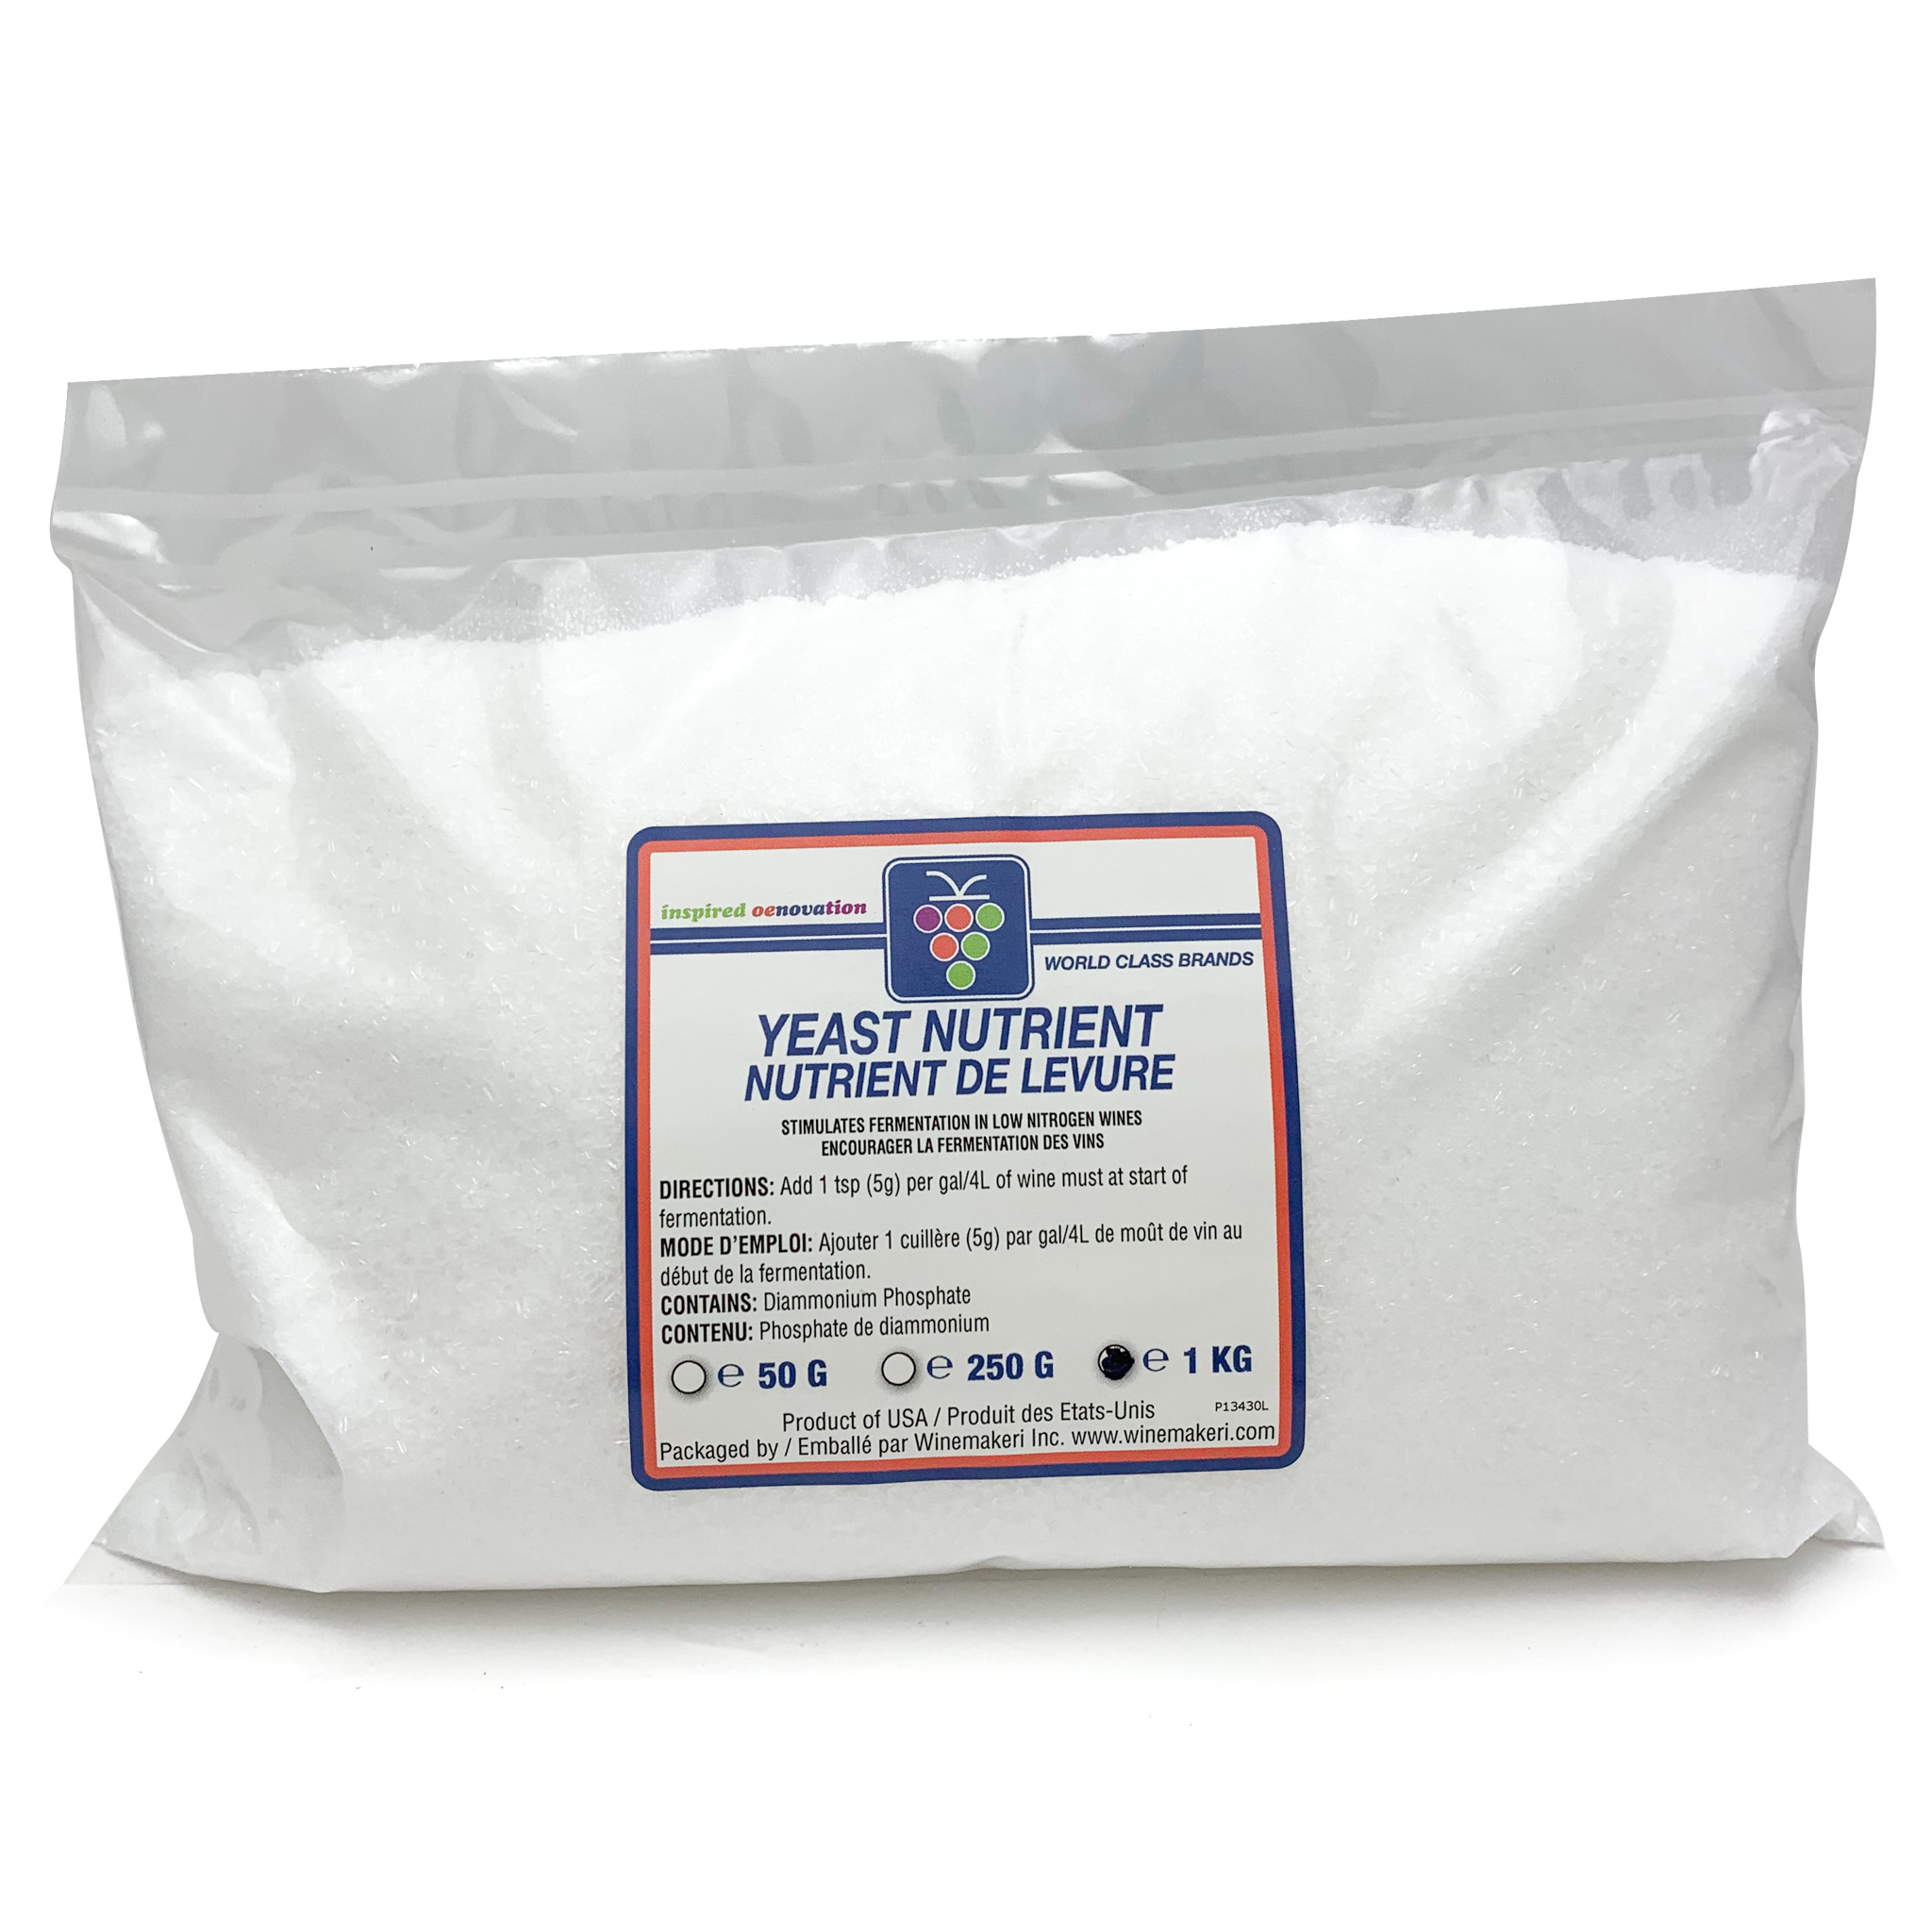 Product image for Yeast Nutrient (DAP)